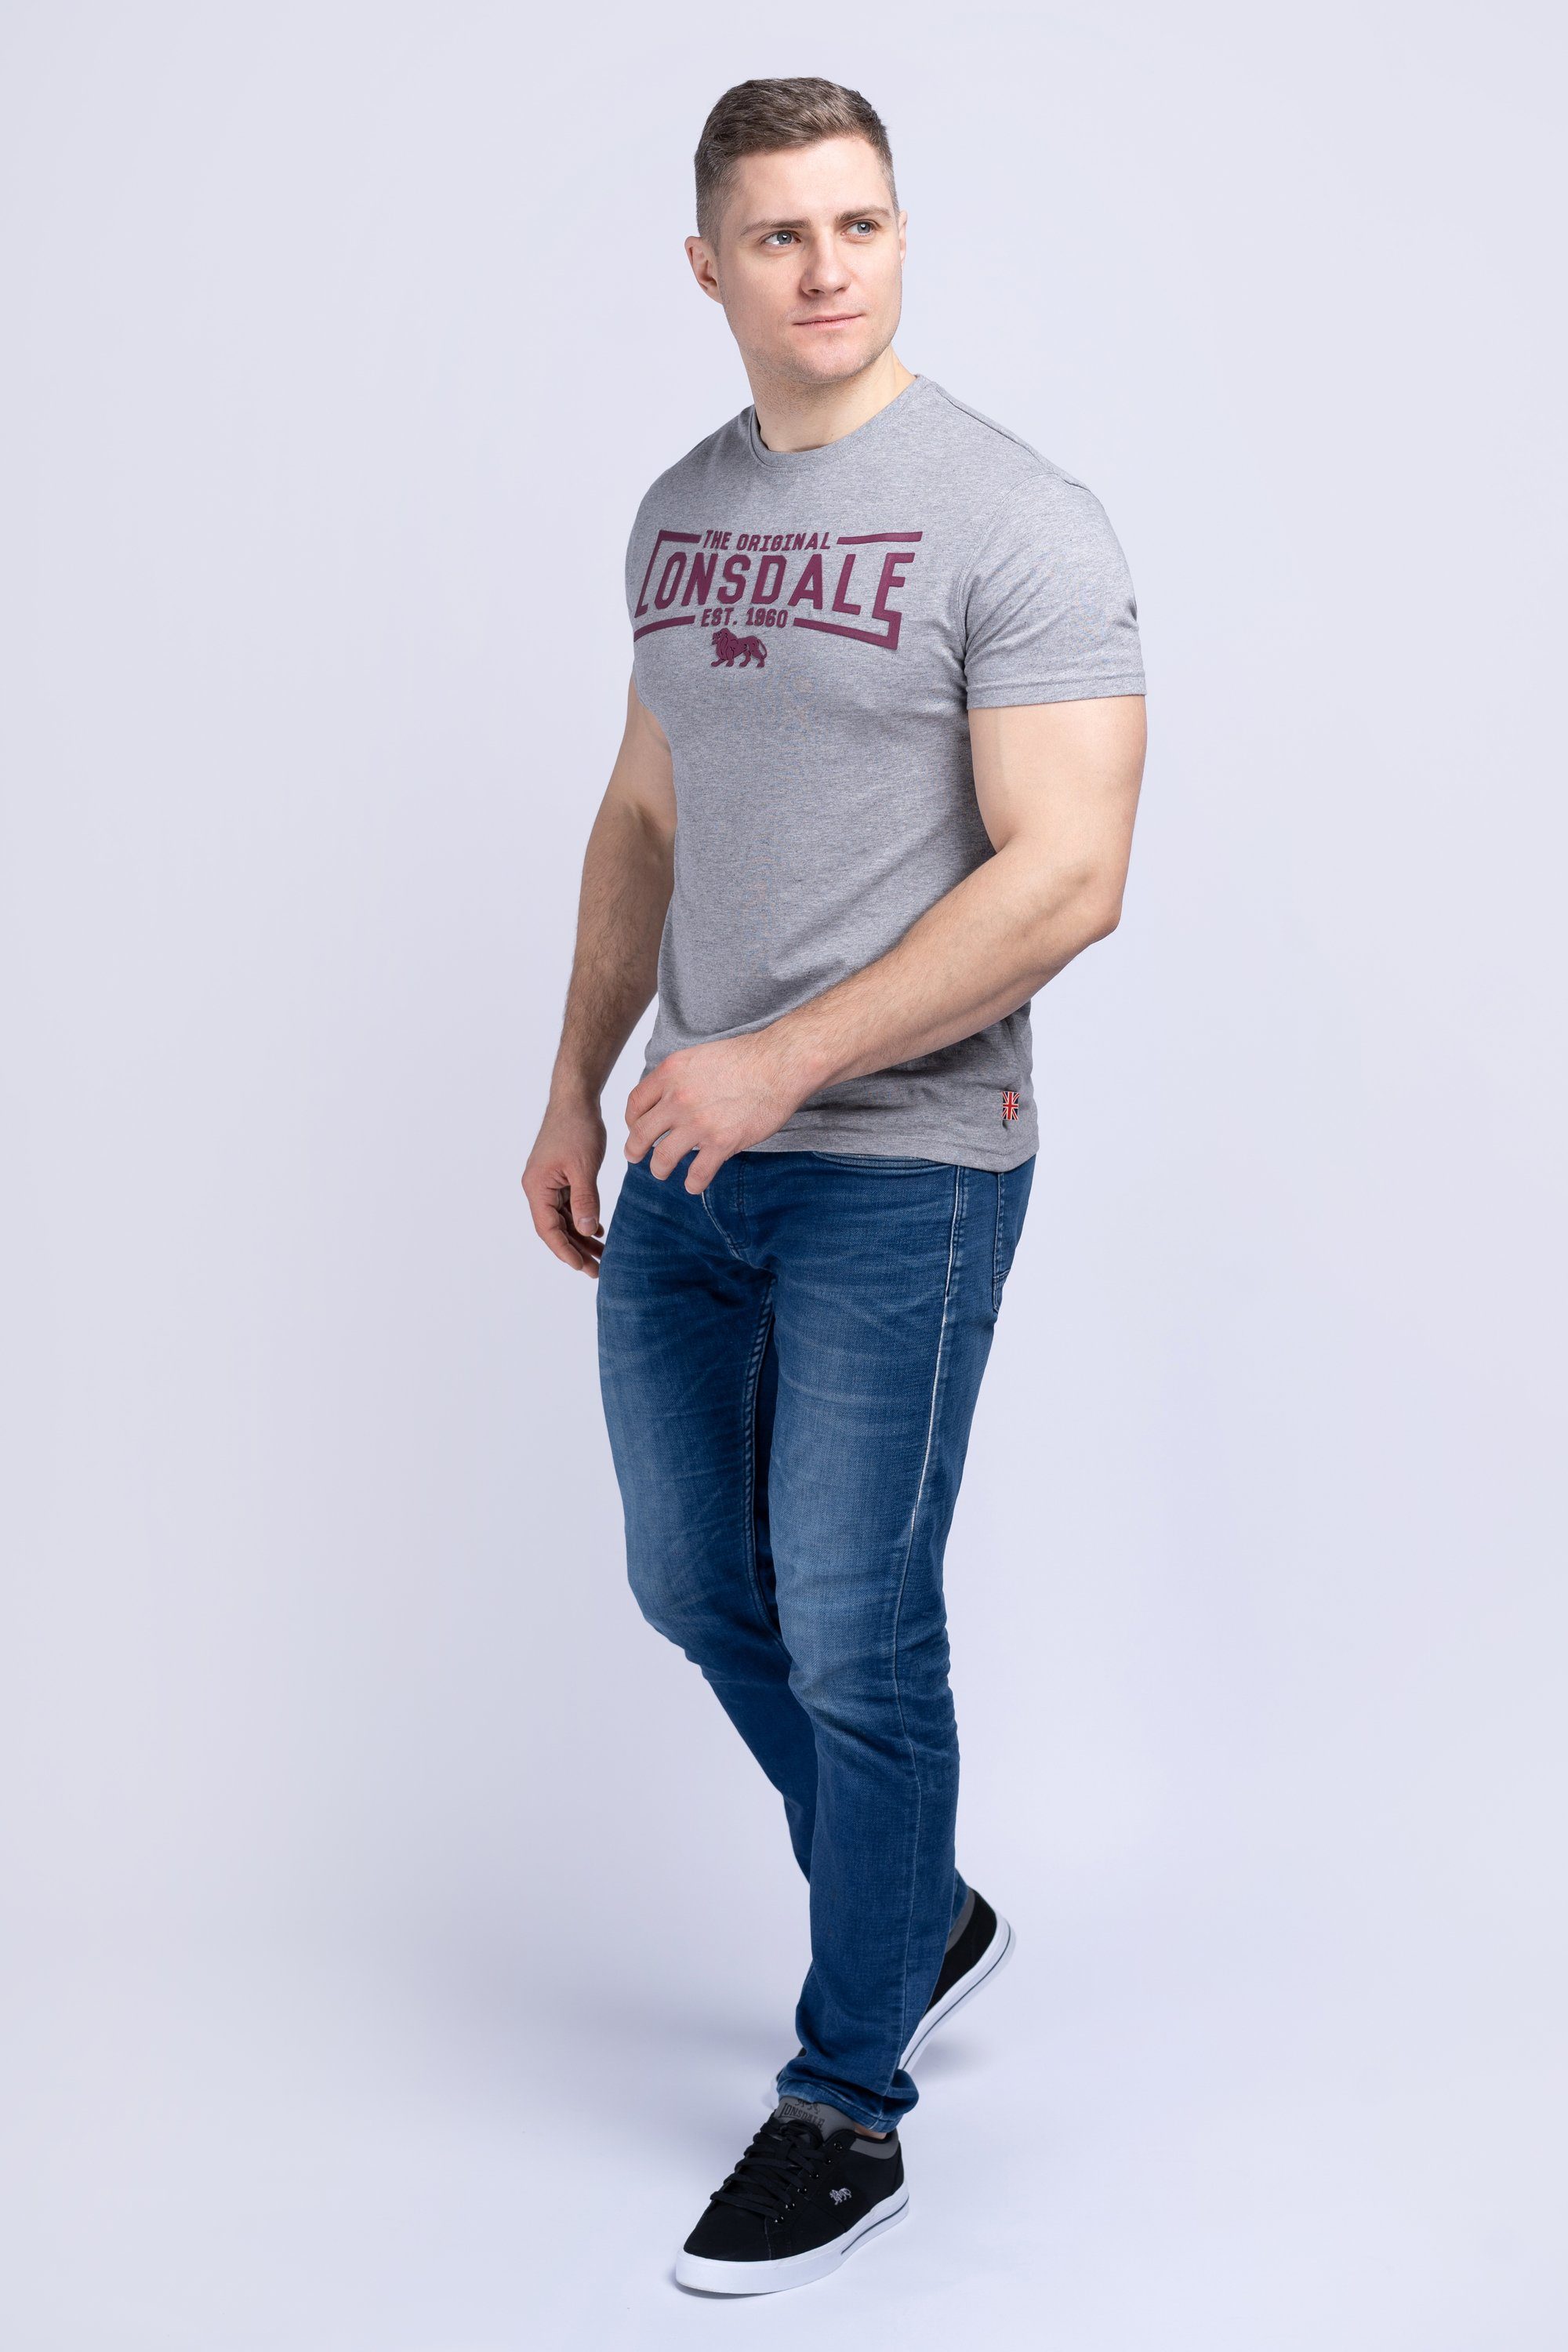 Lonsdale T-Shirt NYBSTER Marl Grey/Oxblood